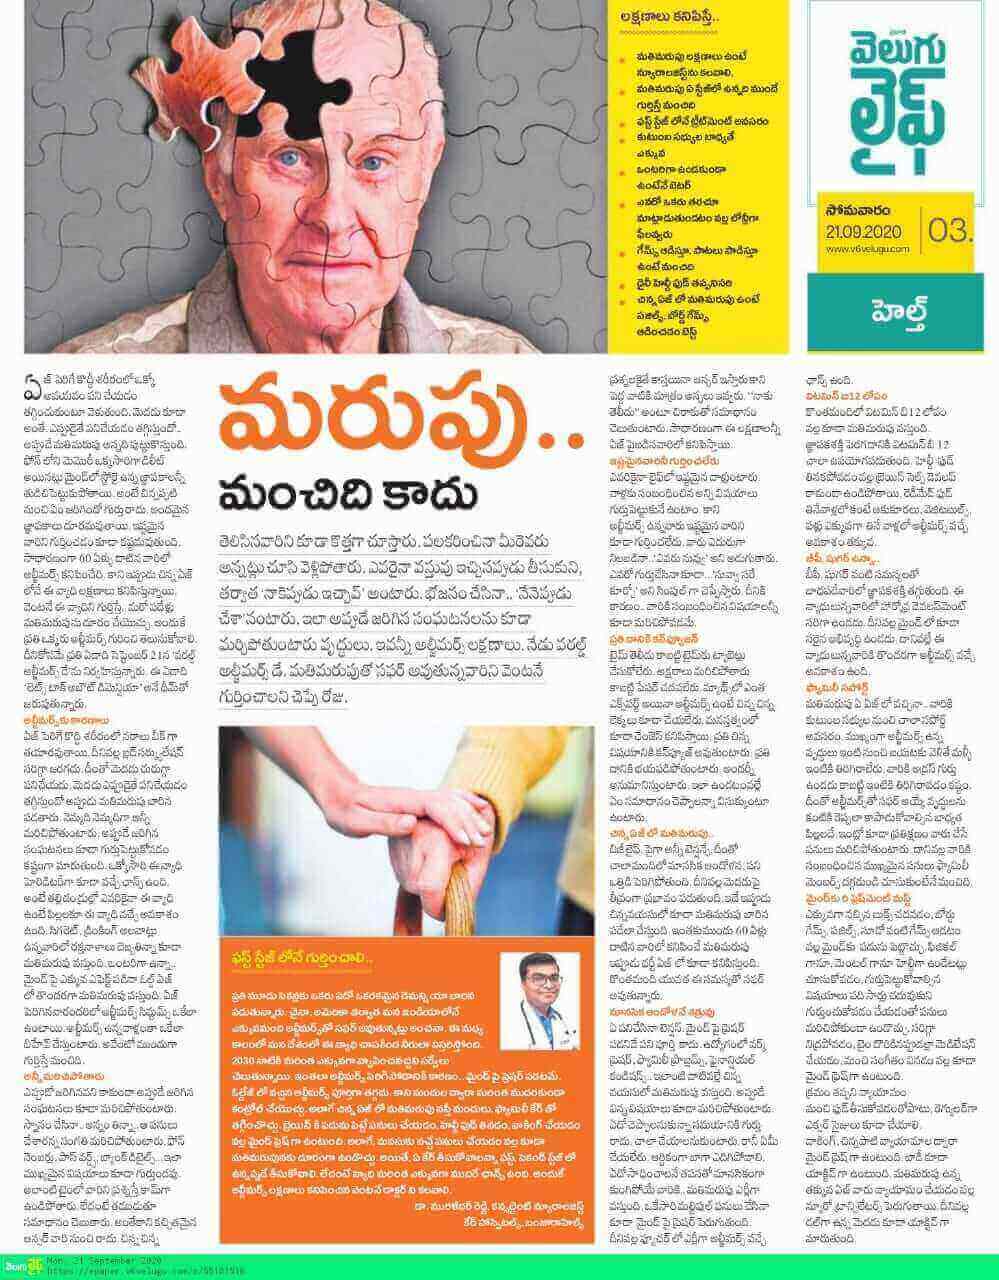 Article on the Occasion of World Alzheimer's Day by Dr. Muralidhar Reddy Consultant Neurologist